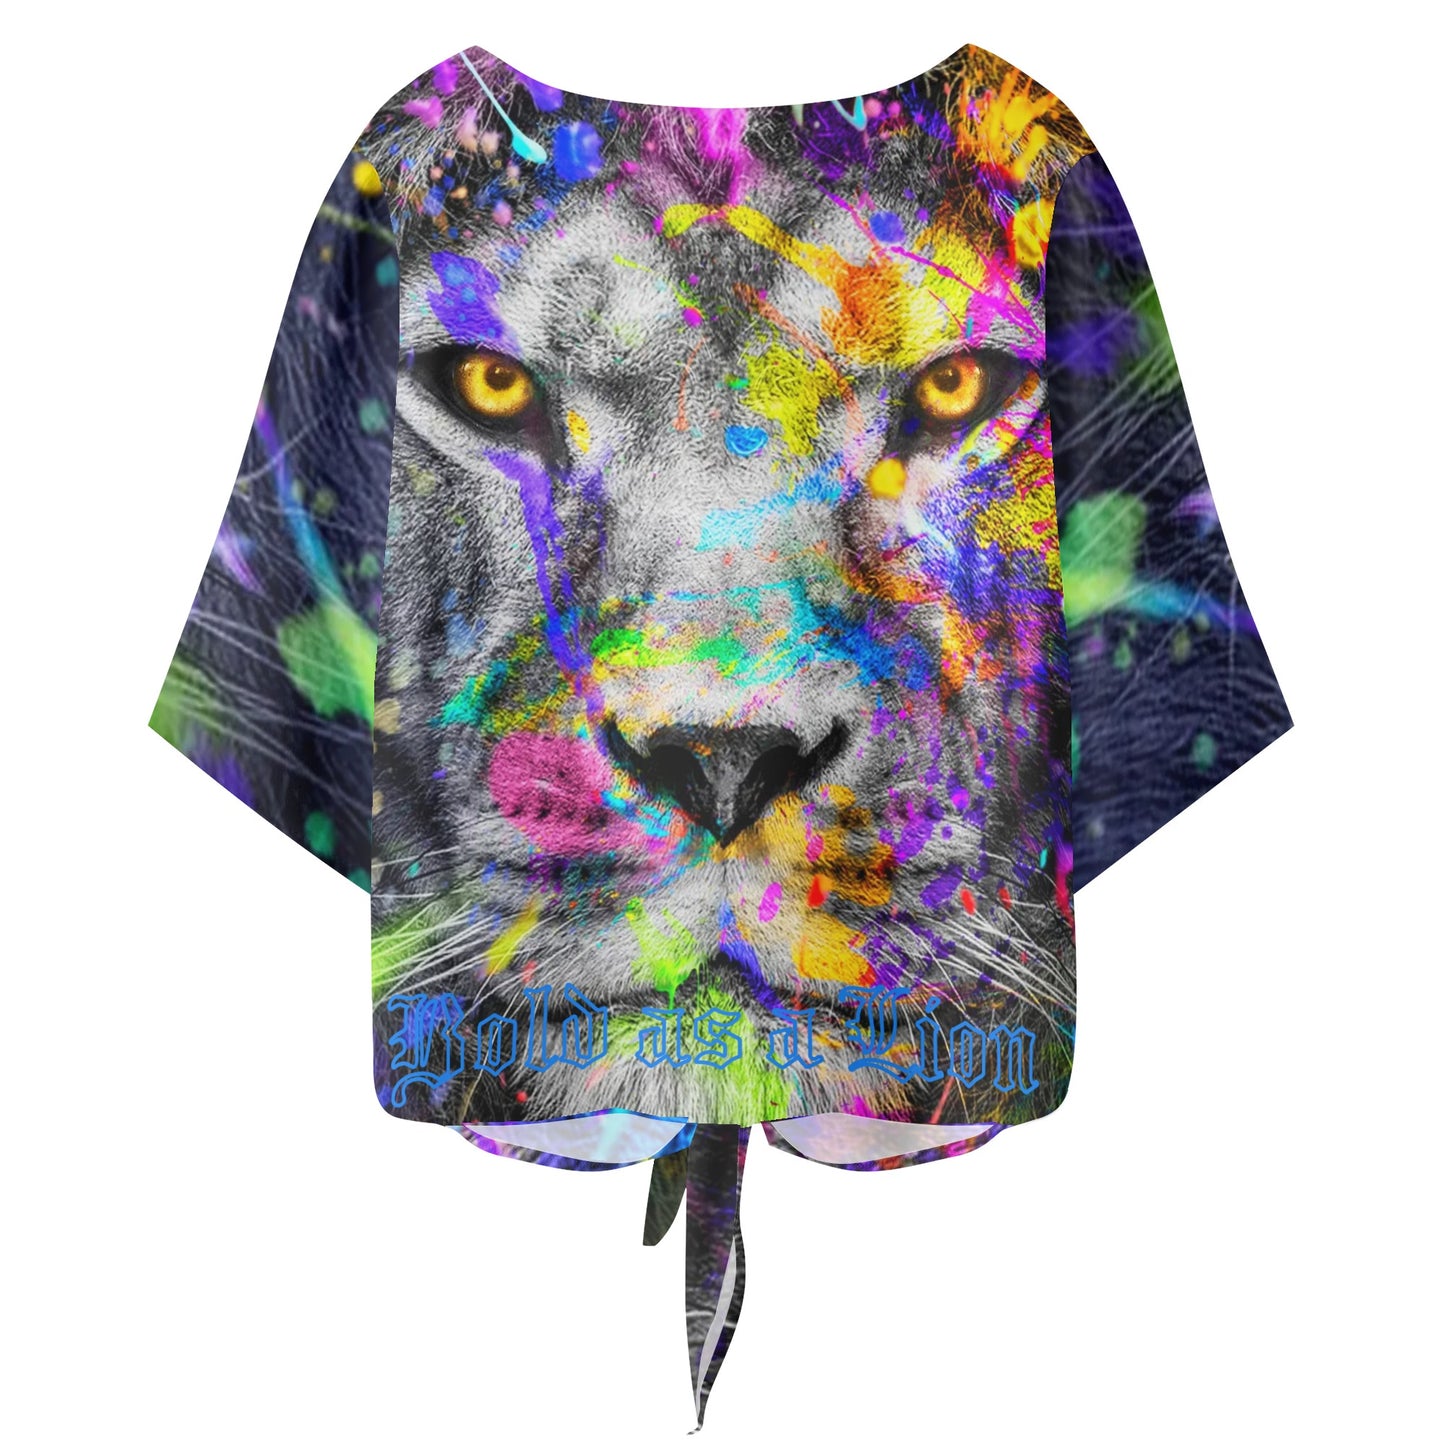 BOLD AS A LION- Women‘s’ V-neck Tie Front Knot Chiffon Blouse, FREE SHIPPING IN USA